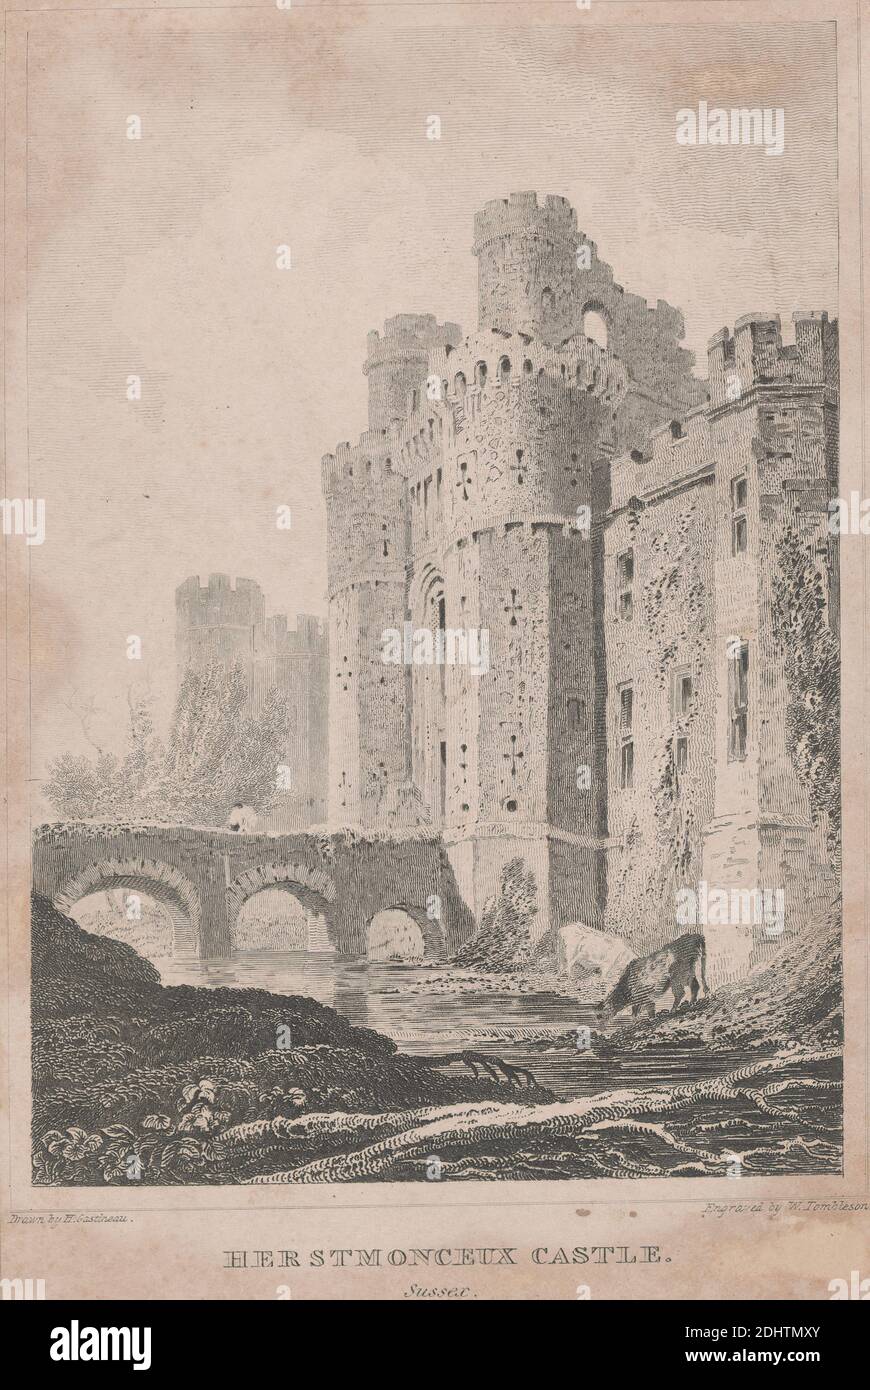 Herstmonceux Castle, Sussex, William Tombleson, ca.1795–1835, British, after Henry Gastineau, 1791–1876, British, undated, Engraving, (verso) graphite on smooth, medium, cream wove paper, Sheet: 5 3/4 × 3 7/8 inches (14.6 × 9.8 cm), architectural subject, castle, East Sussex, England, Europe, Herstmonceux, United Kingdom Stock Photo